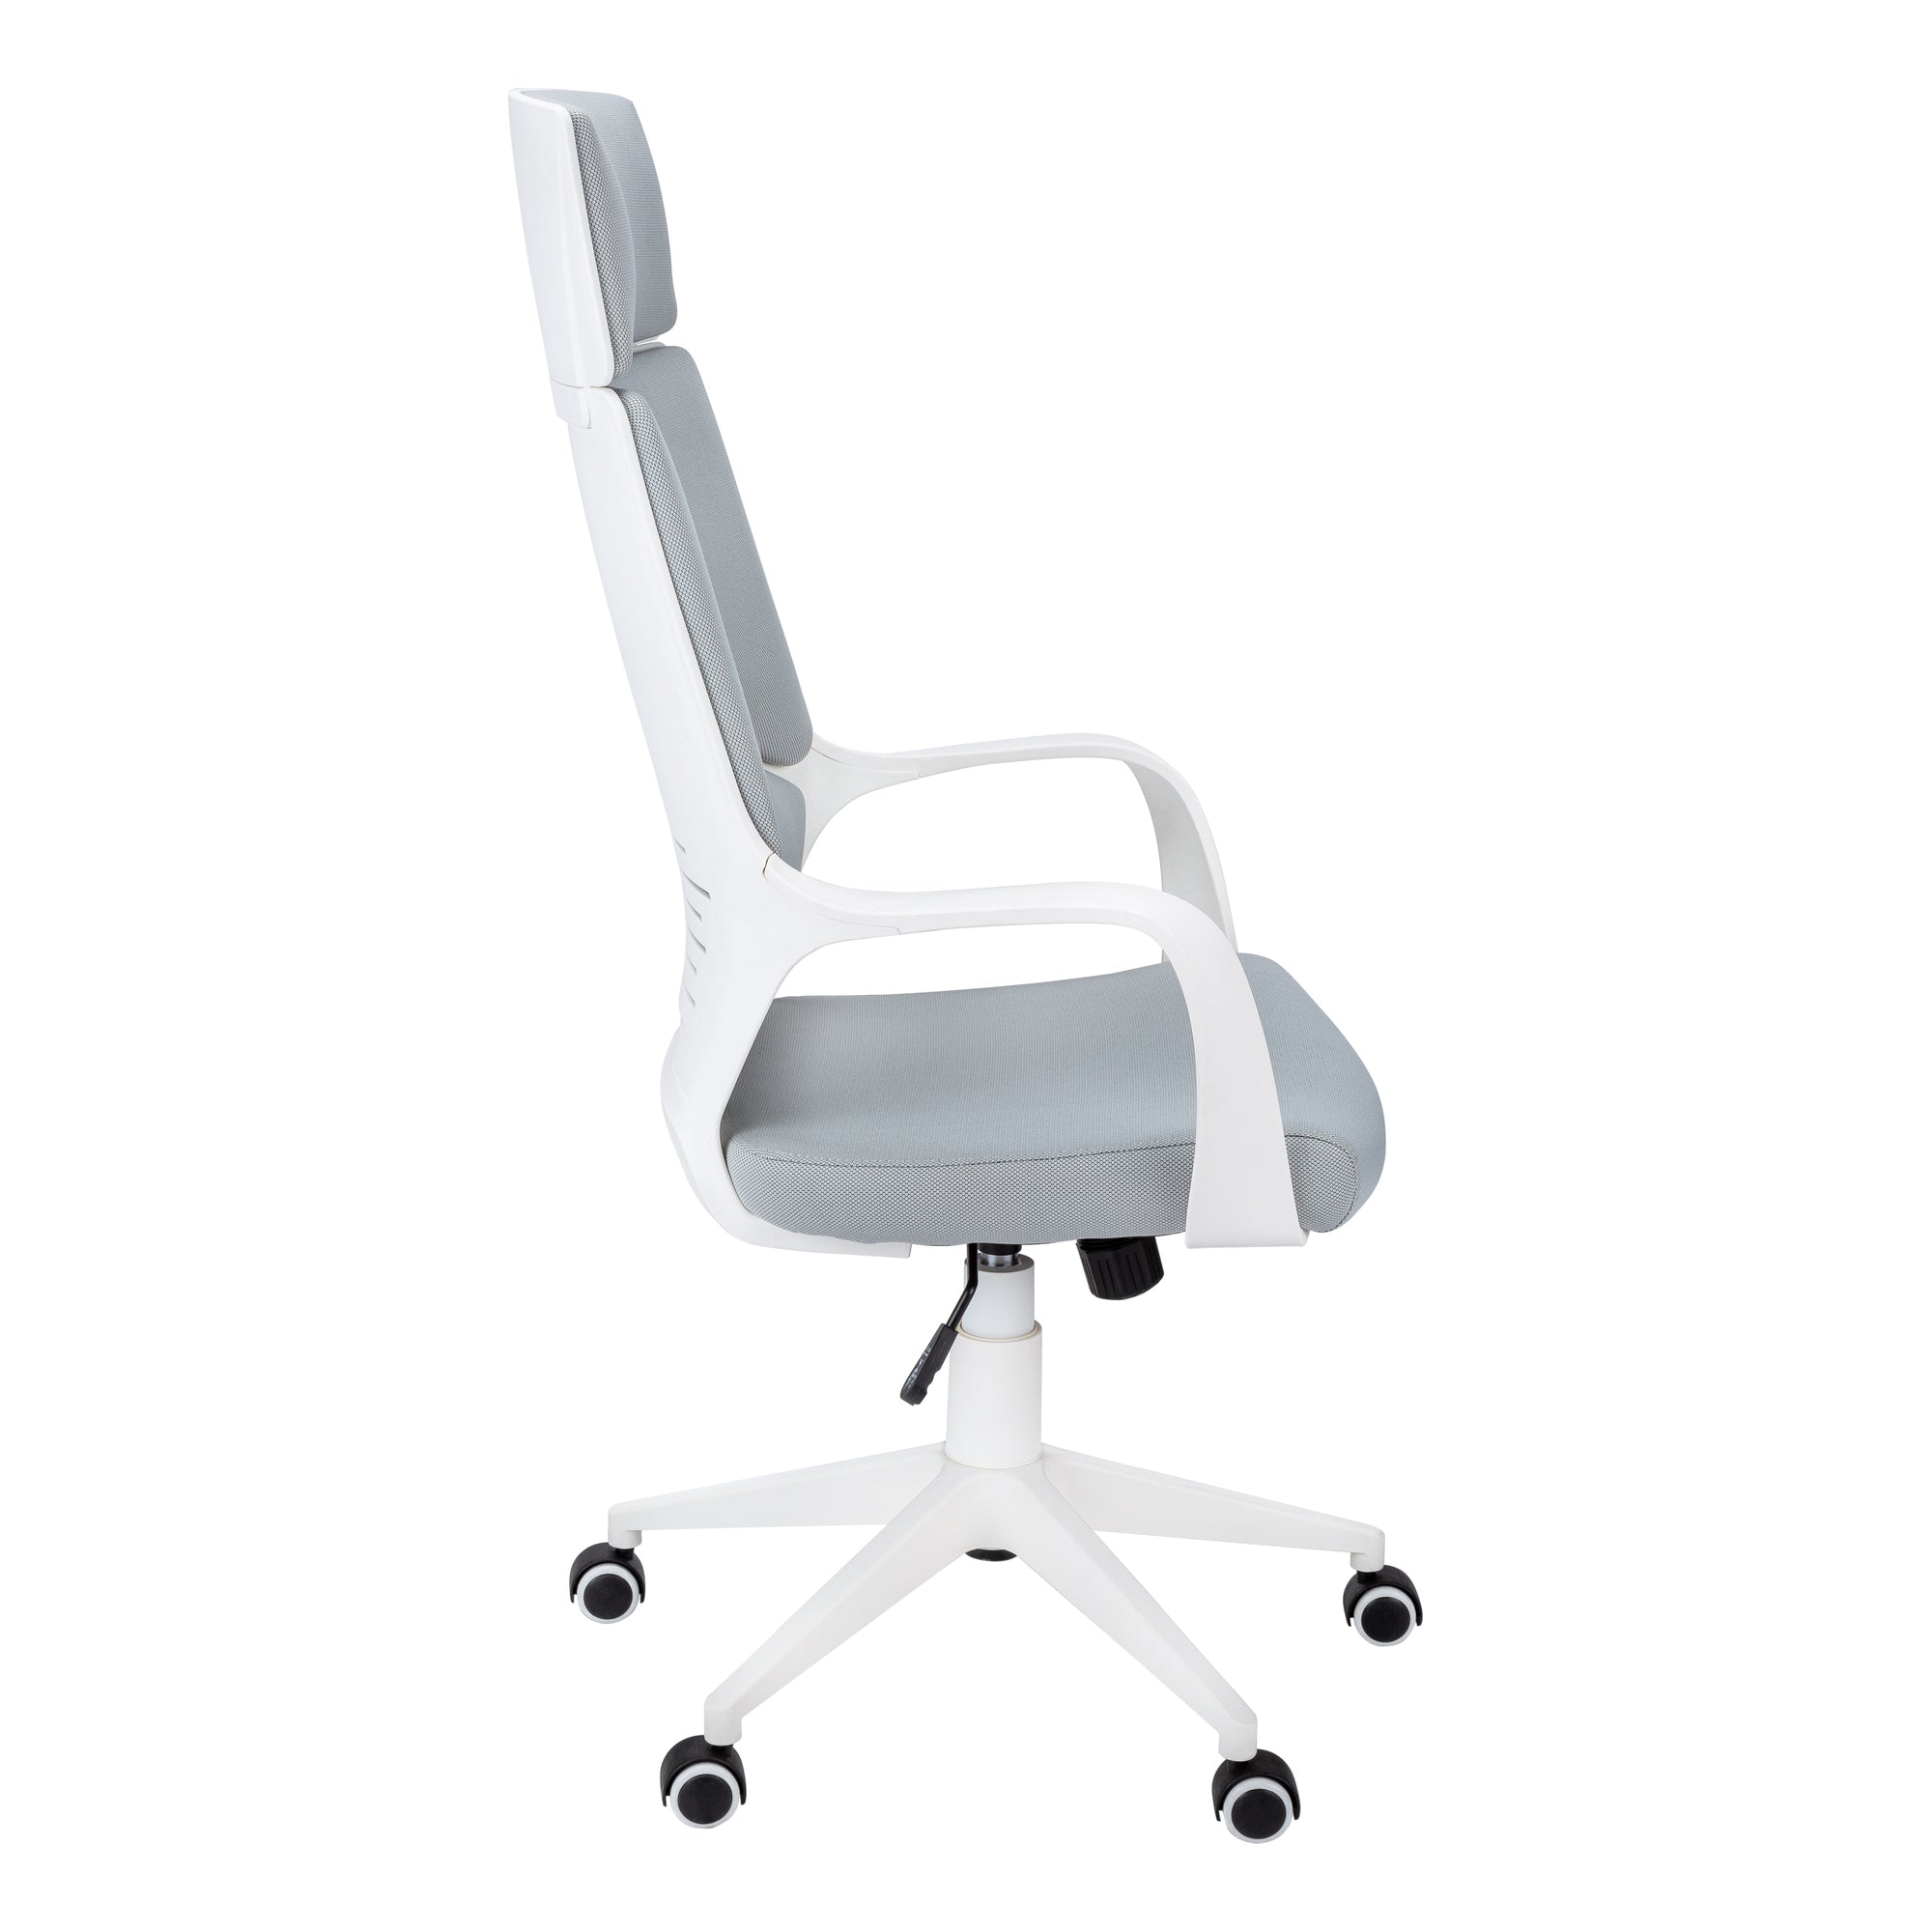 OFFICE CHAIR - WHITE / GREY FABRIC / HIGH BACK EXECUTIVE